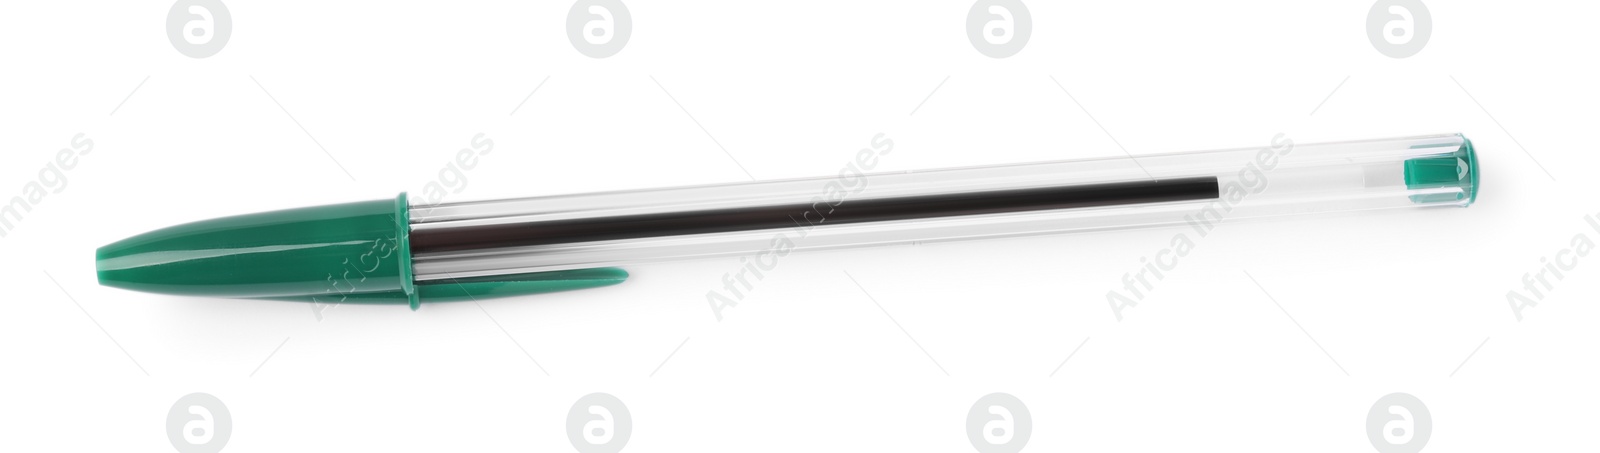 Photo of New green plastic pen isolated on white